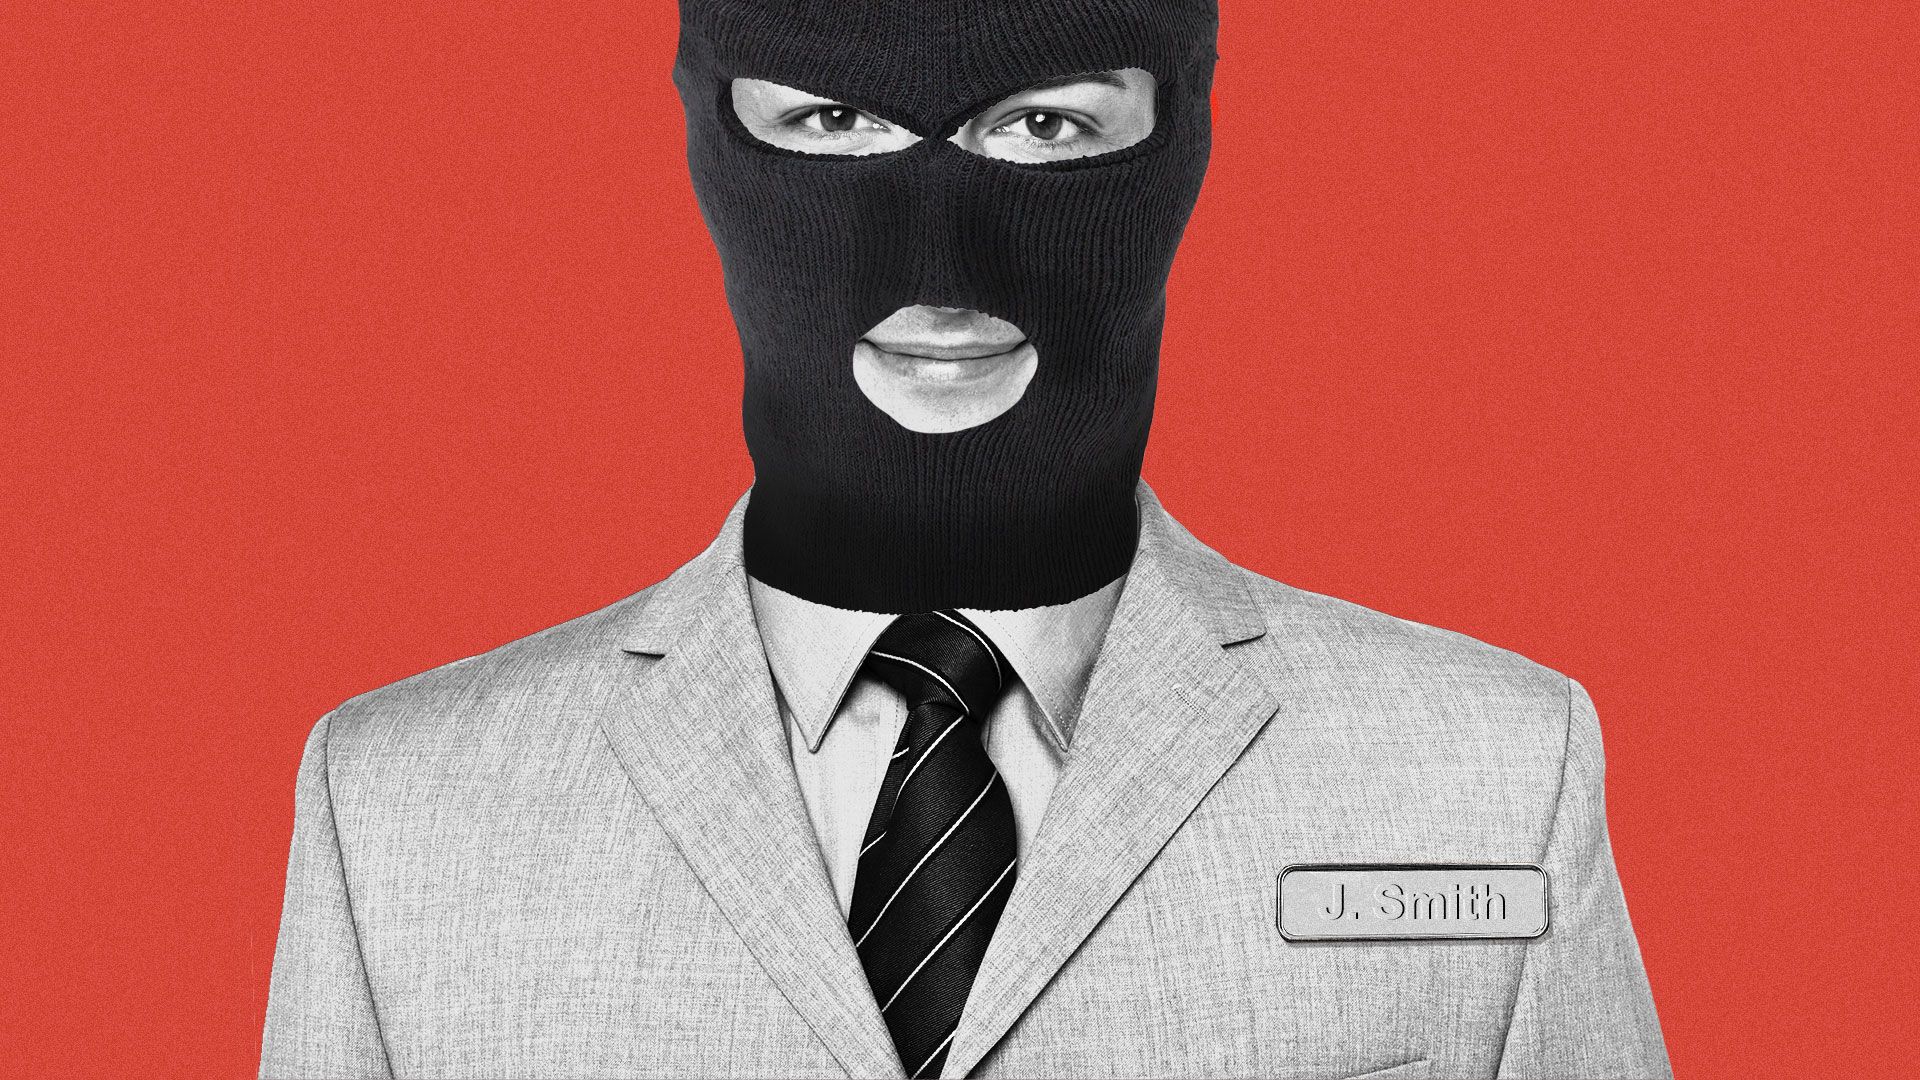  Illustration of an employee with a name tag, wearing a balaclava over his face. 